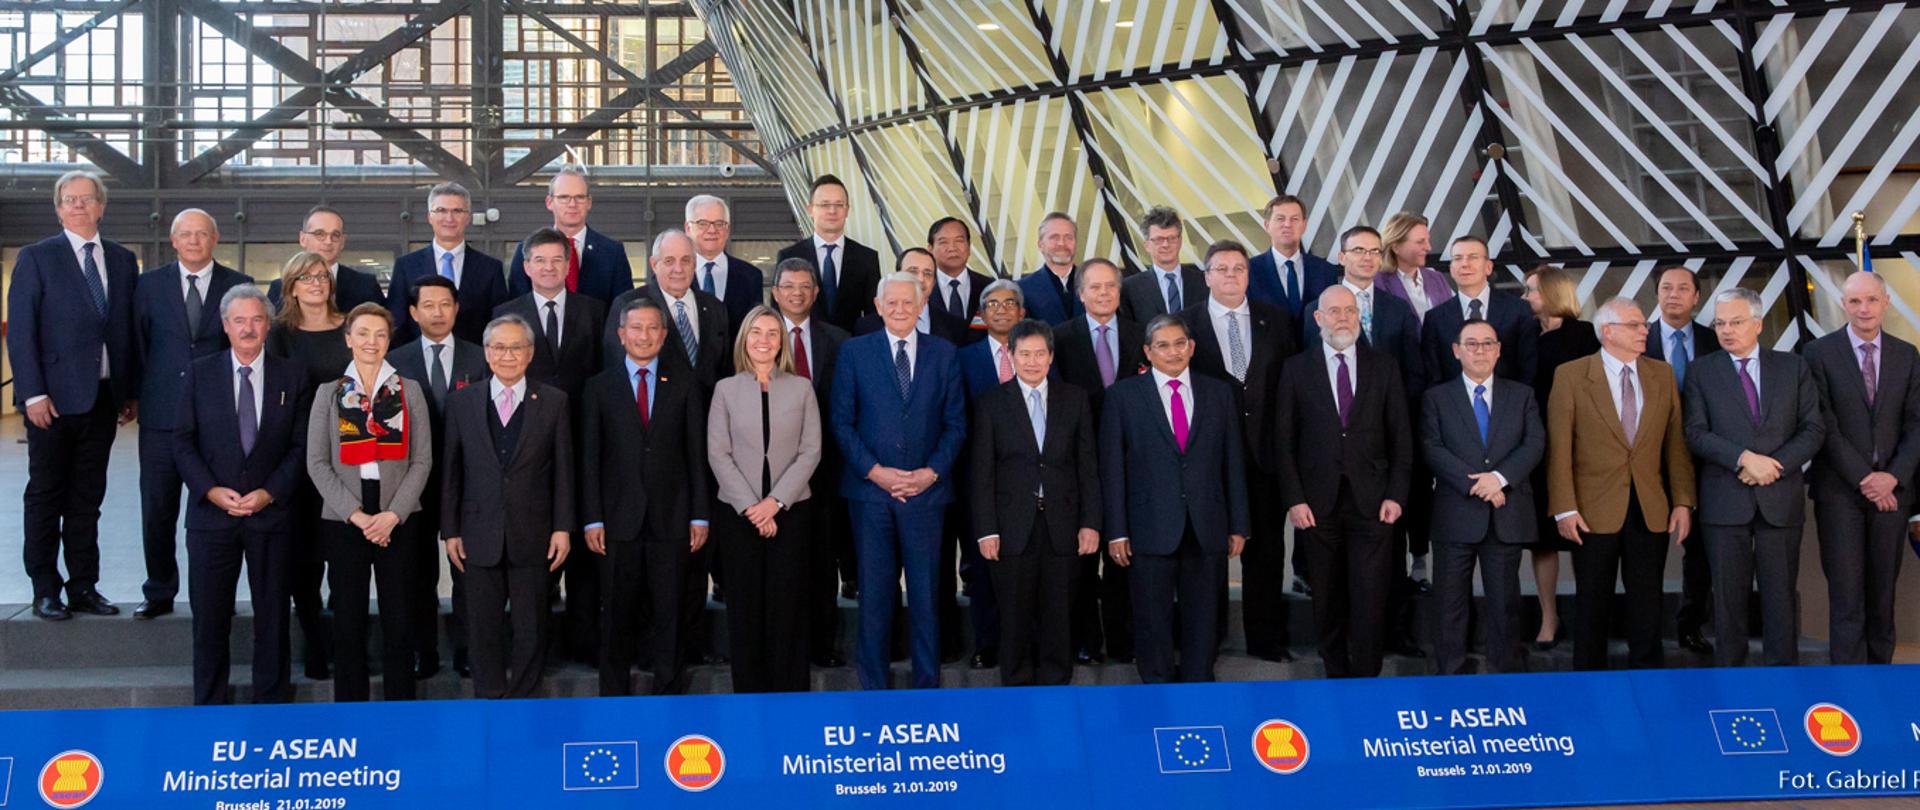 Minister Jacek Czaputowicz attends Foreign Affairs Council and EU-ASEAN ministerial in Brussels